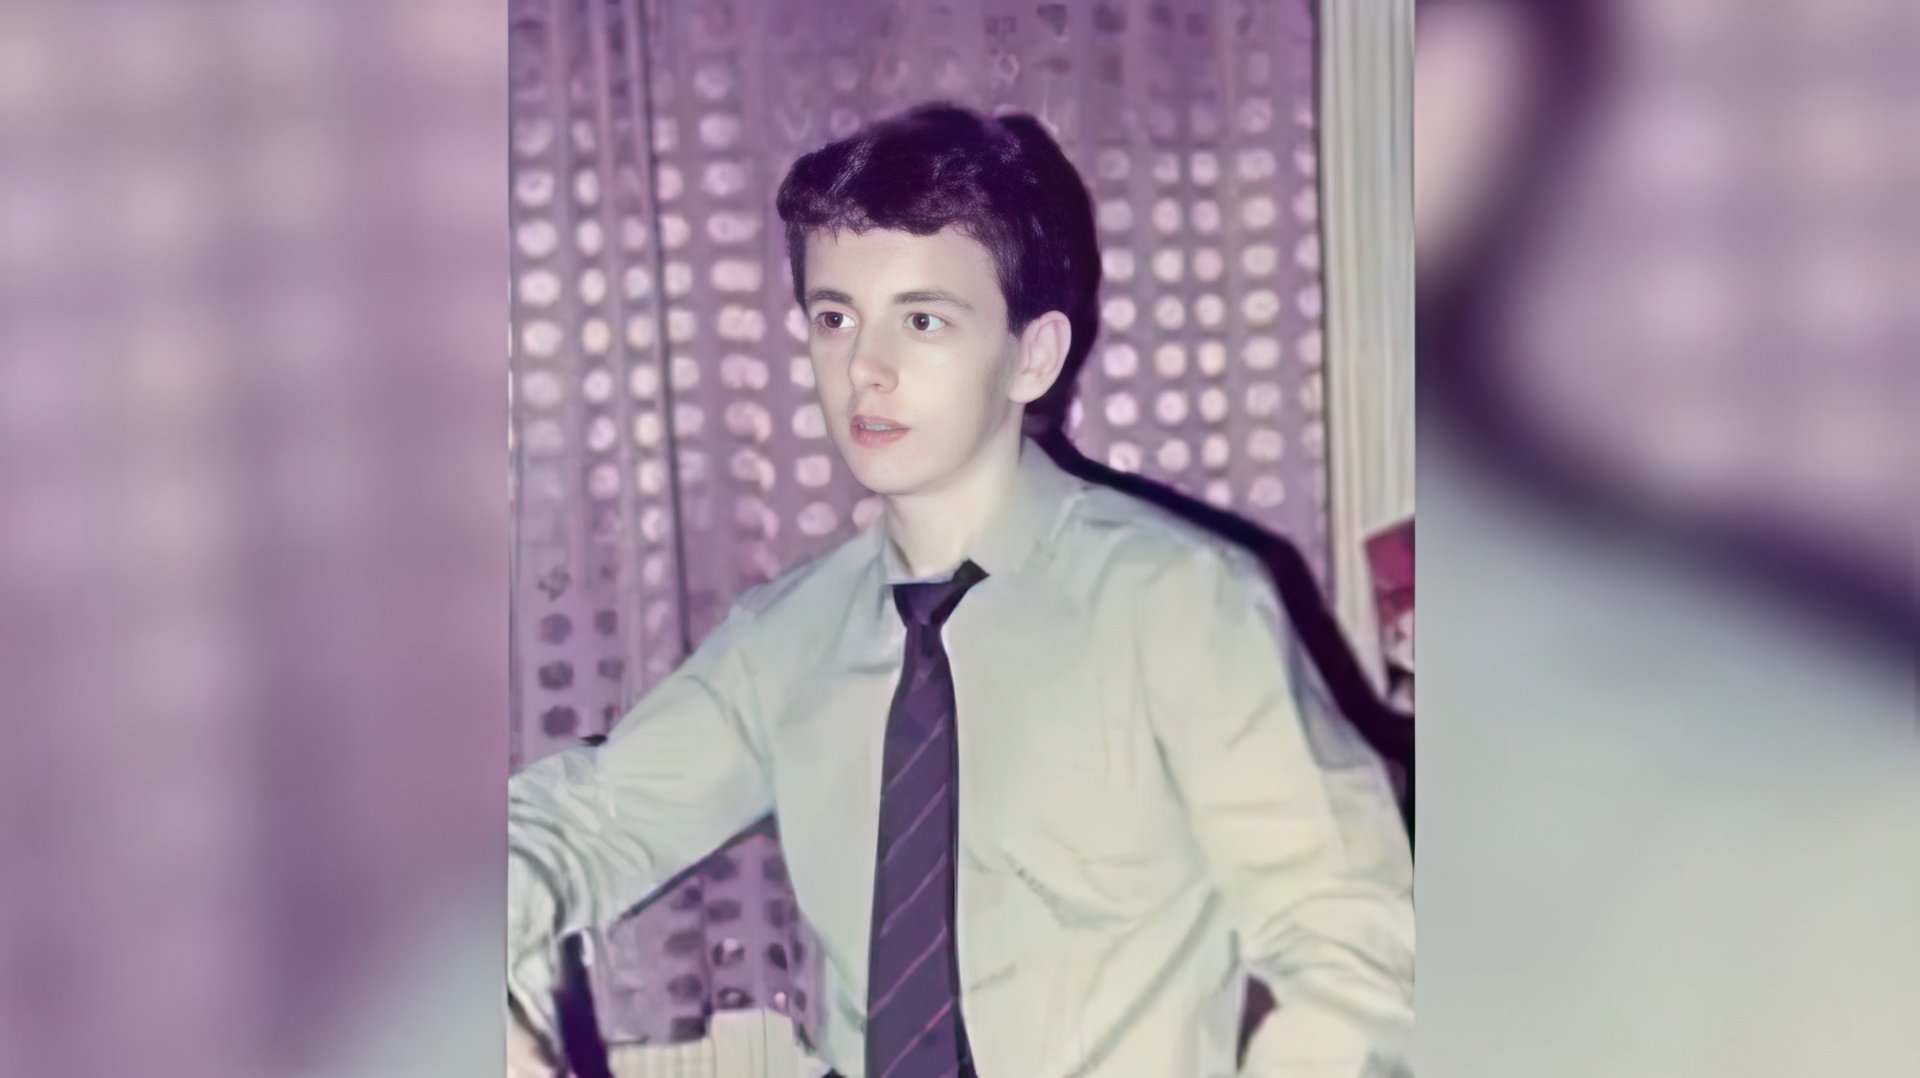 Michael Sheen in his youth